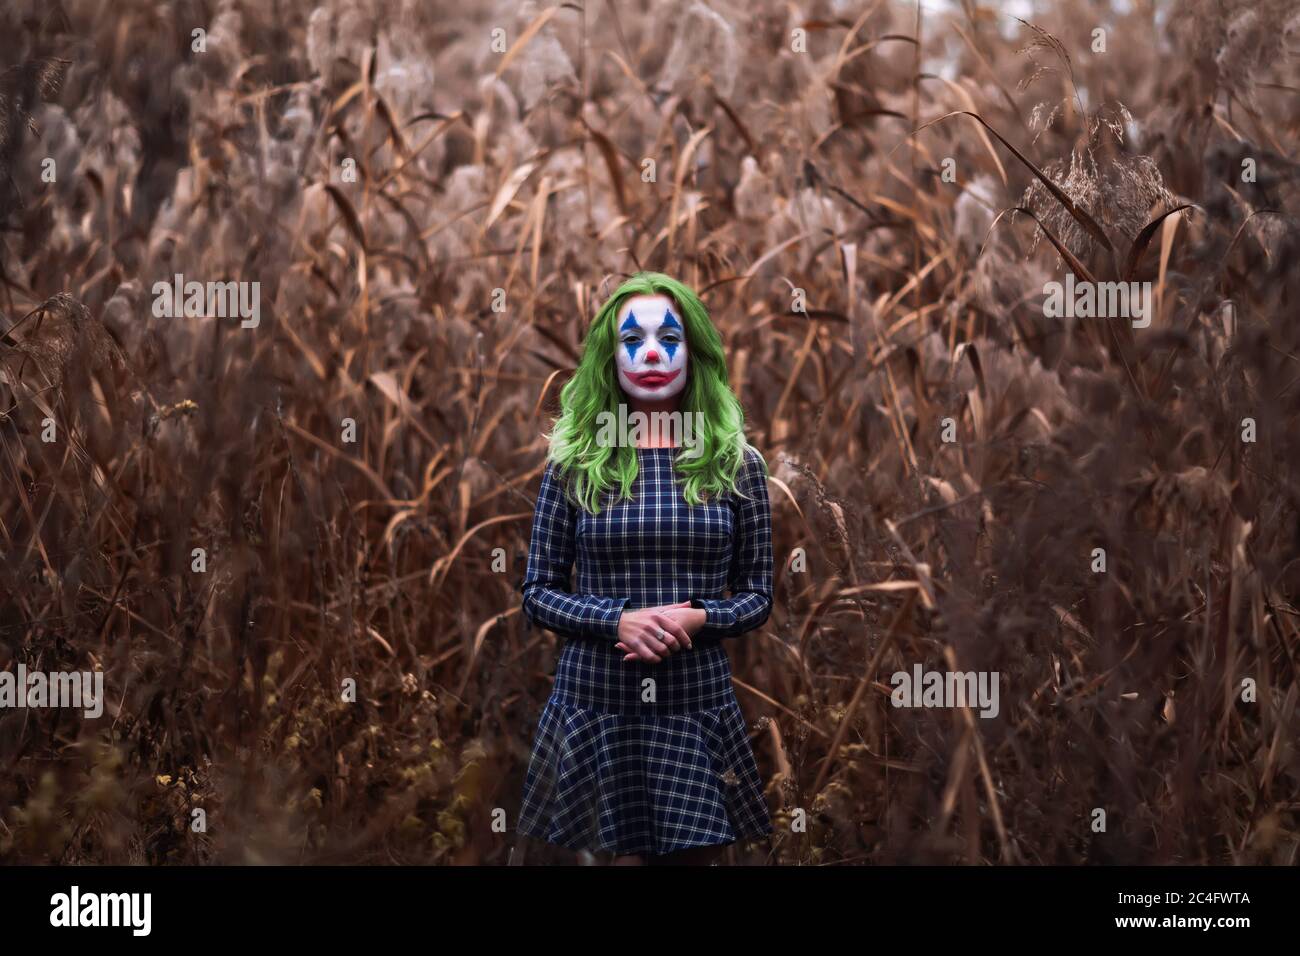 Portrait of a greenhaired girl with joker makeup on a orange leaves reeds background. Stock Photo